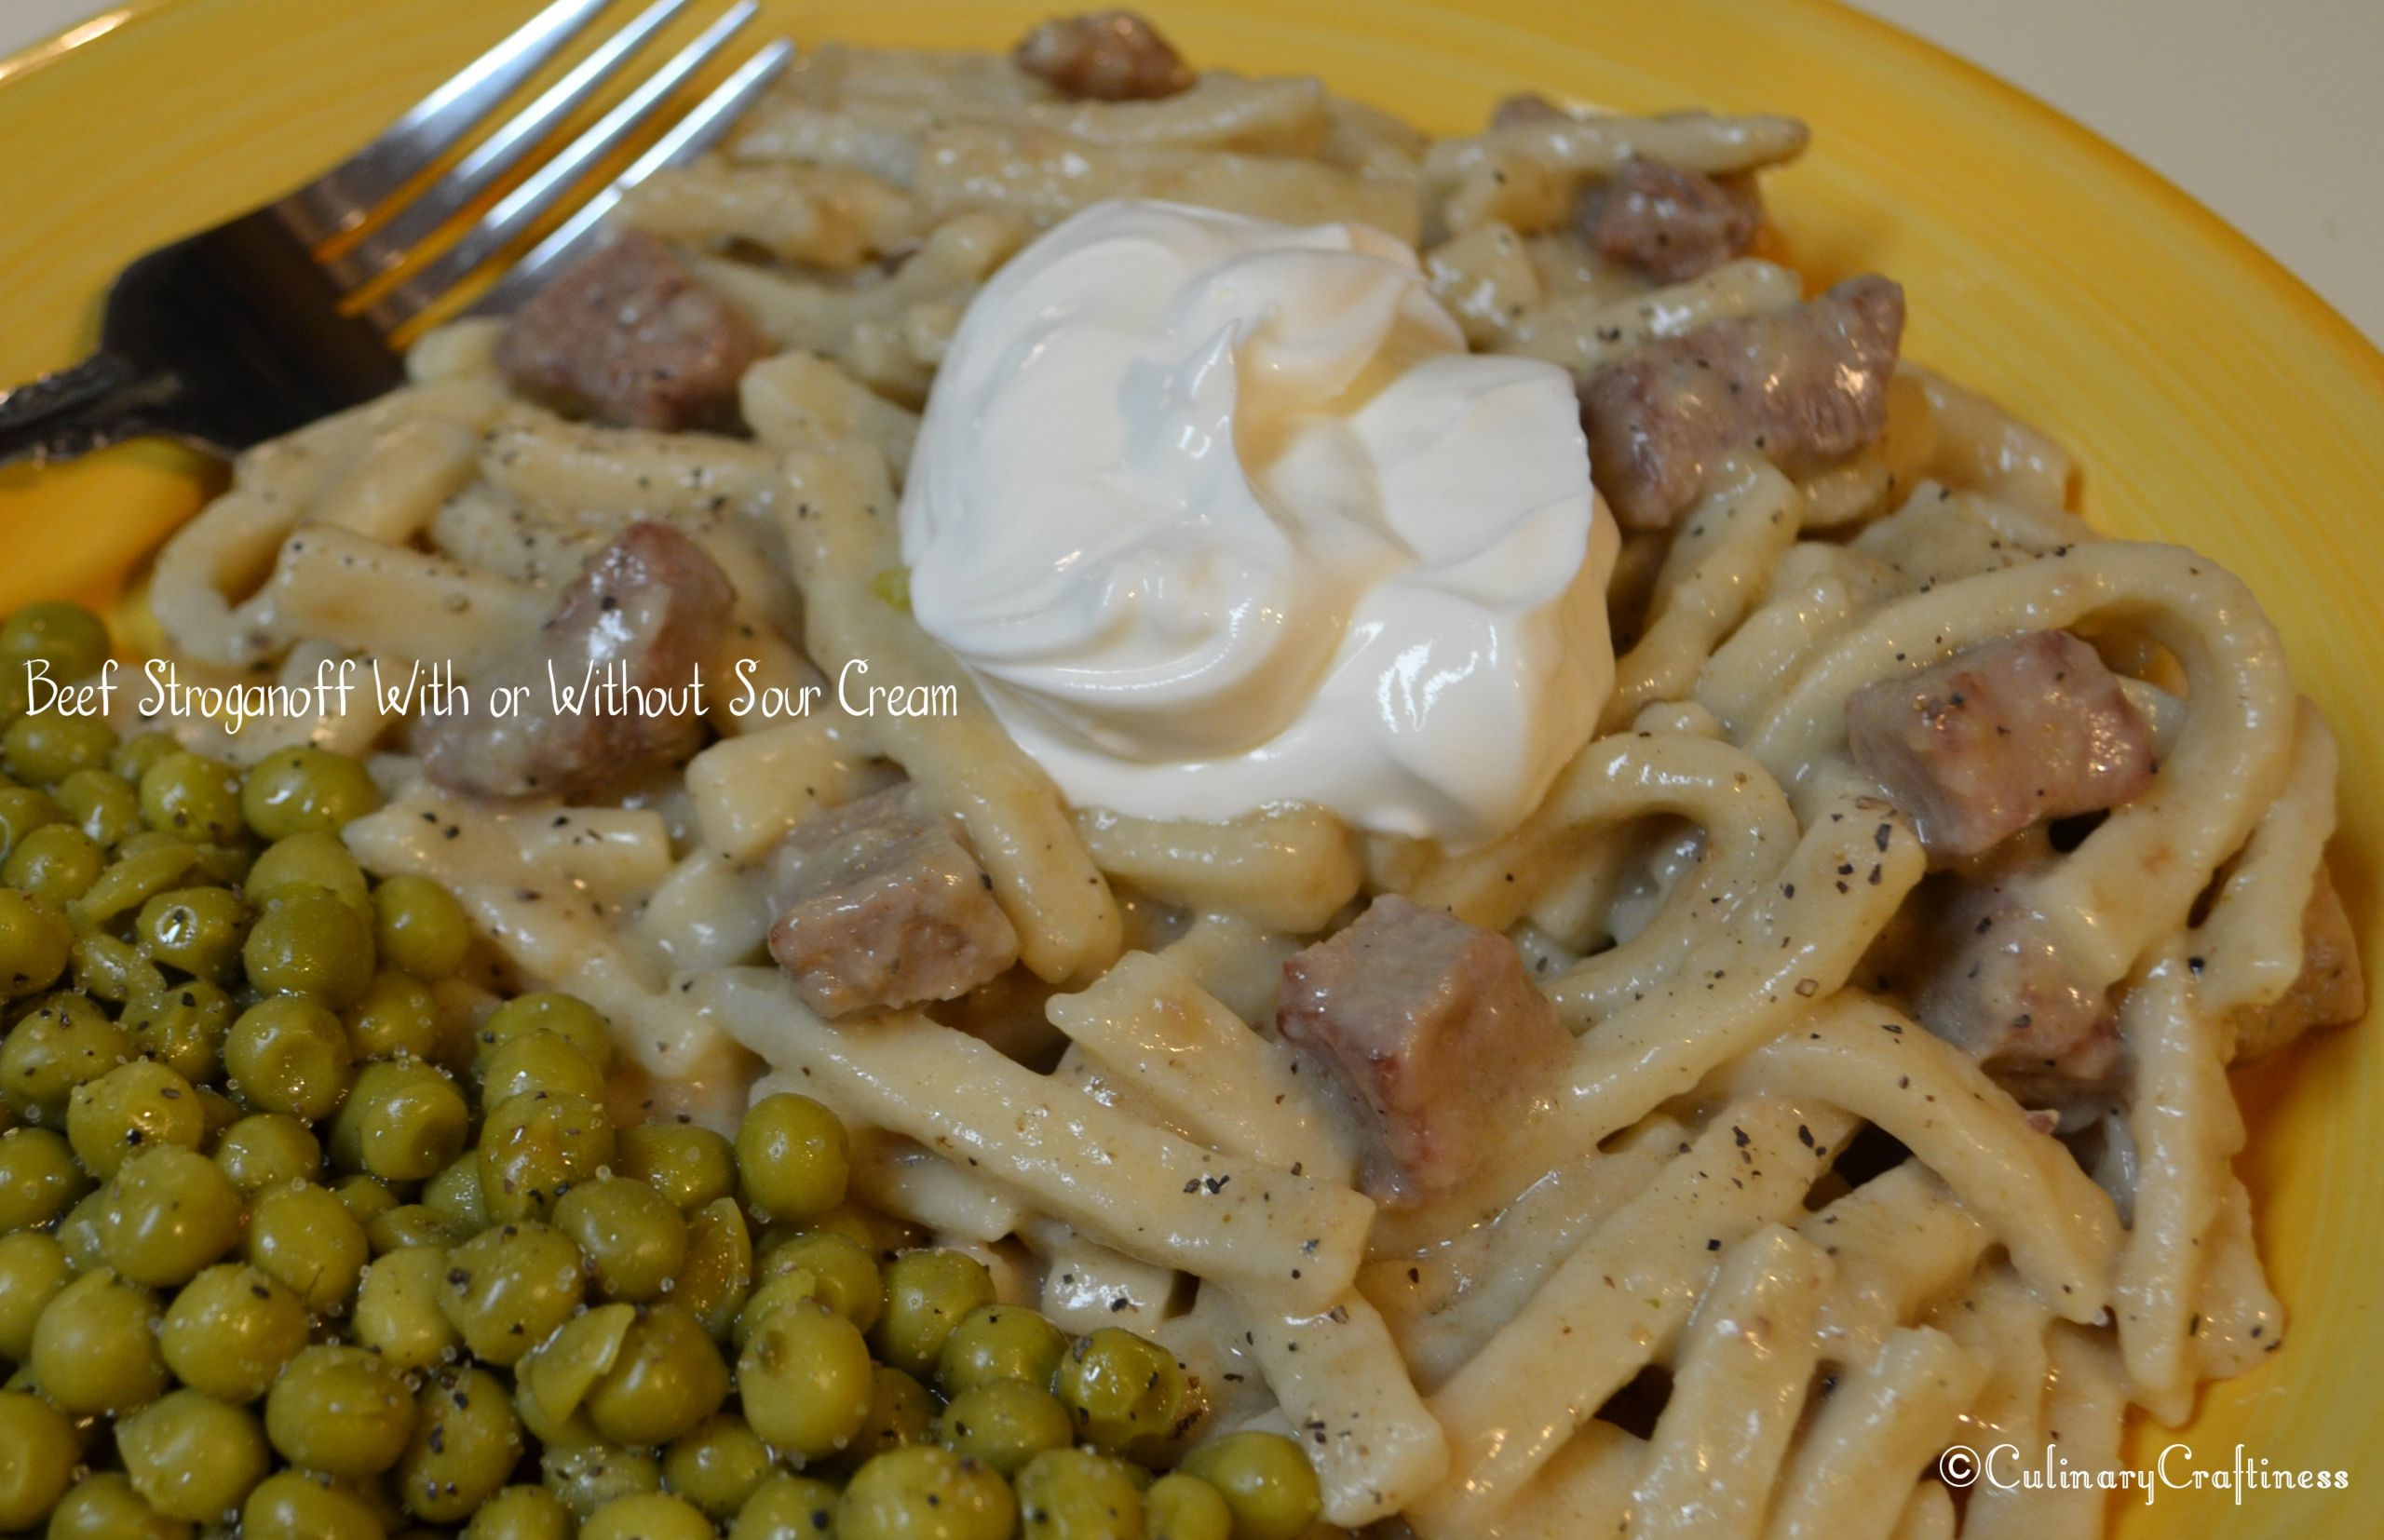 Beef Stroganoff With Sour Cream
 Beef Stroganoff With or Without Sour Cream